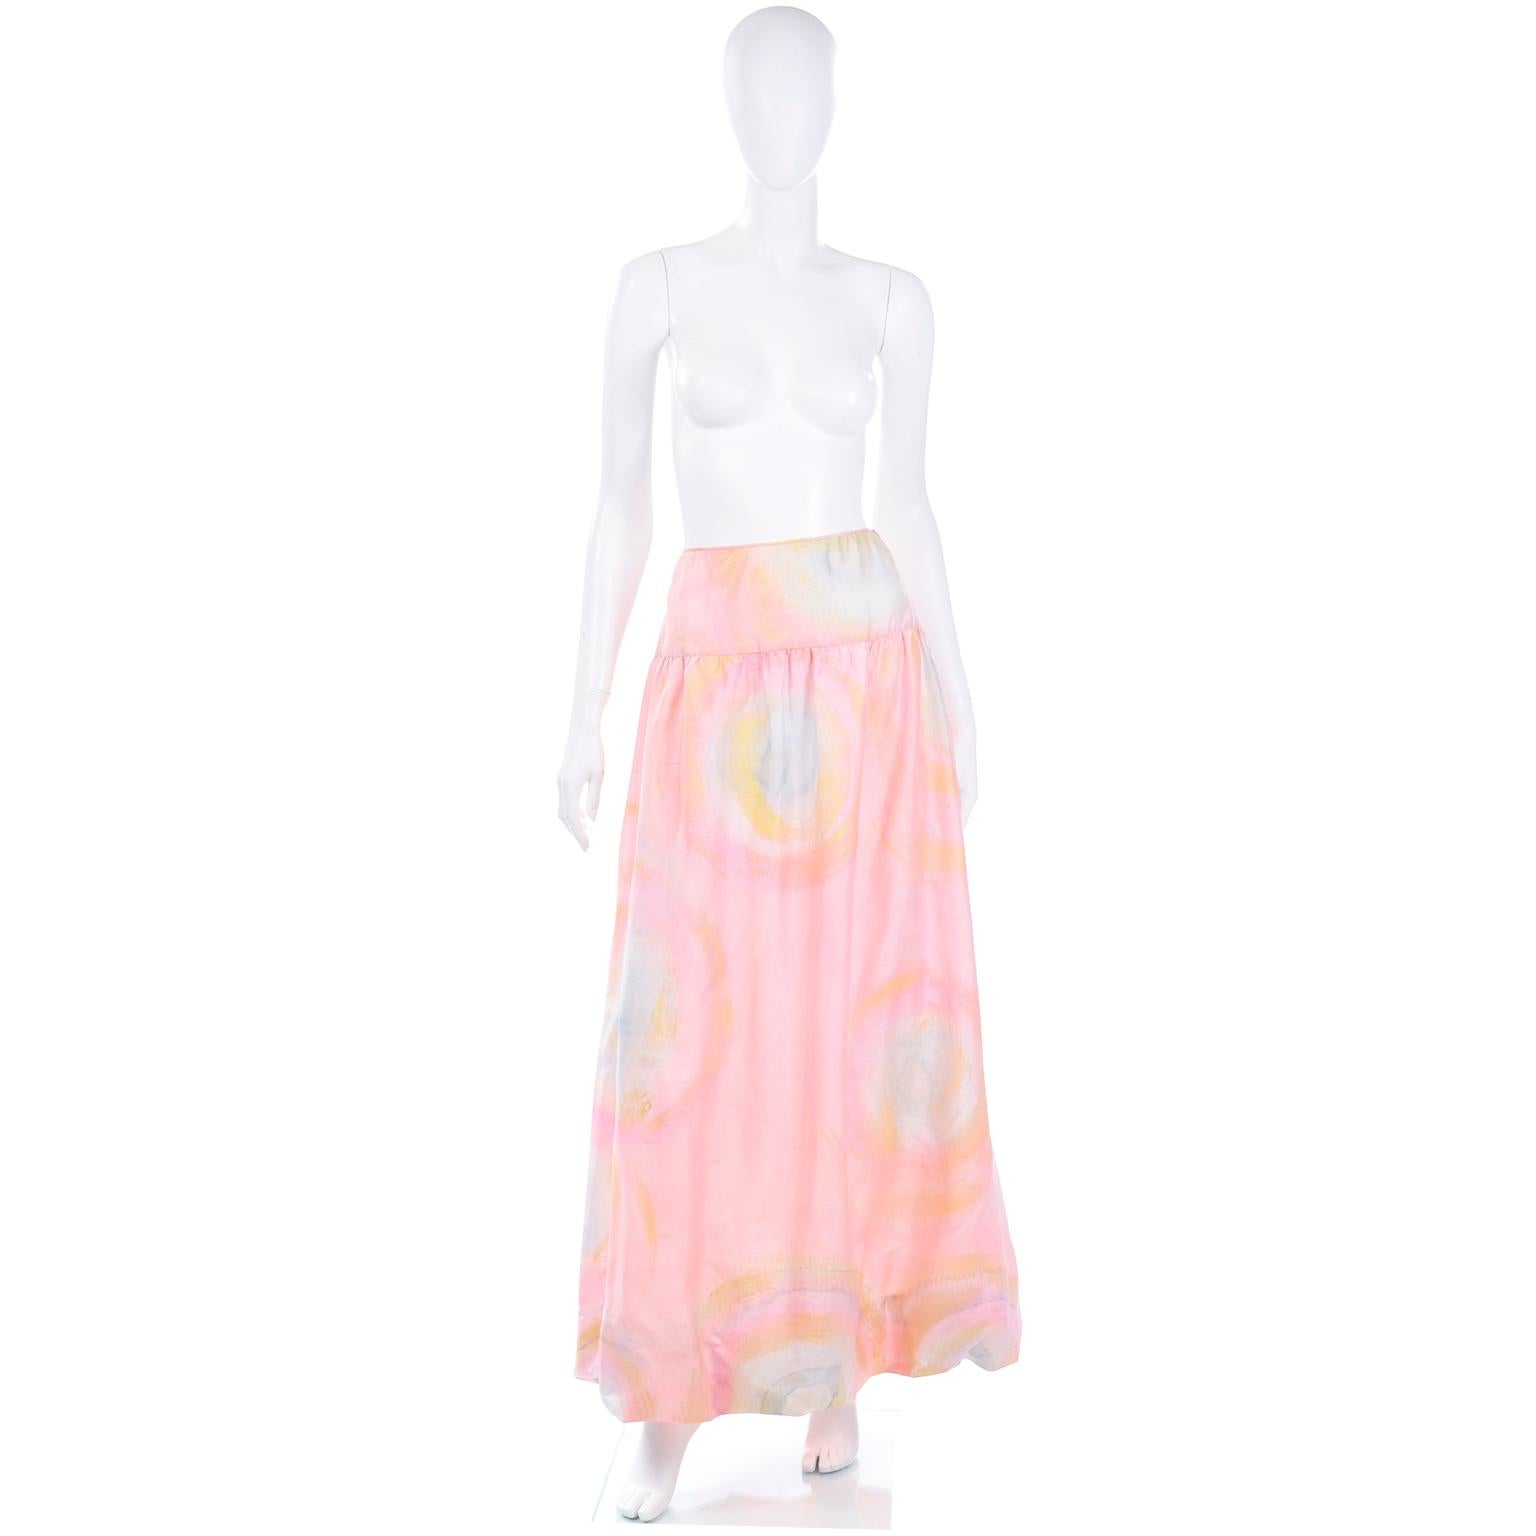 This is a lovely vintage silk pink, blue and yellow vintage Mary McFadden watercolor maxi skirt with a really fun bubble hem. The hand dyed design looks almost like tye dye! This pretty pastel vintage skirt has a wide waistband and closes with a